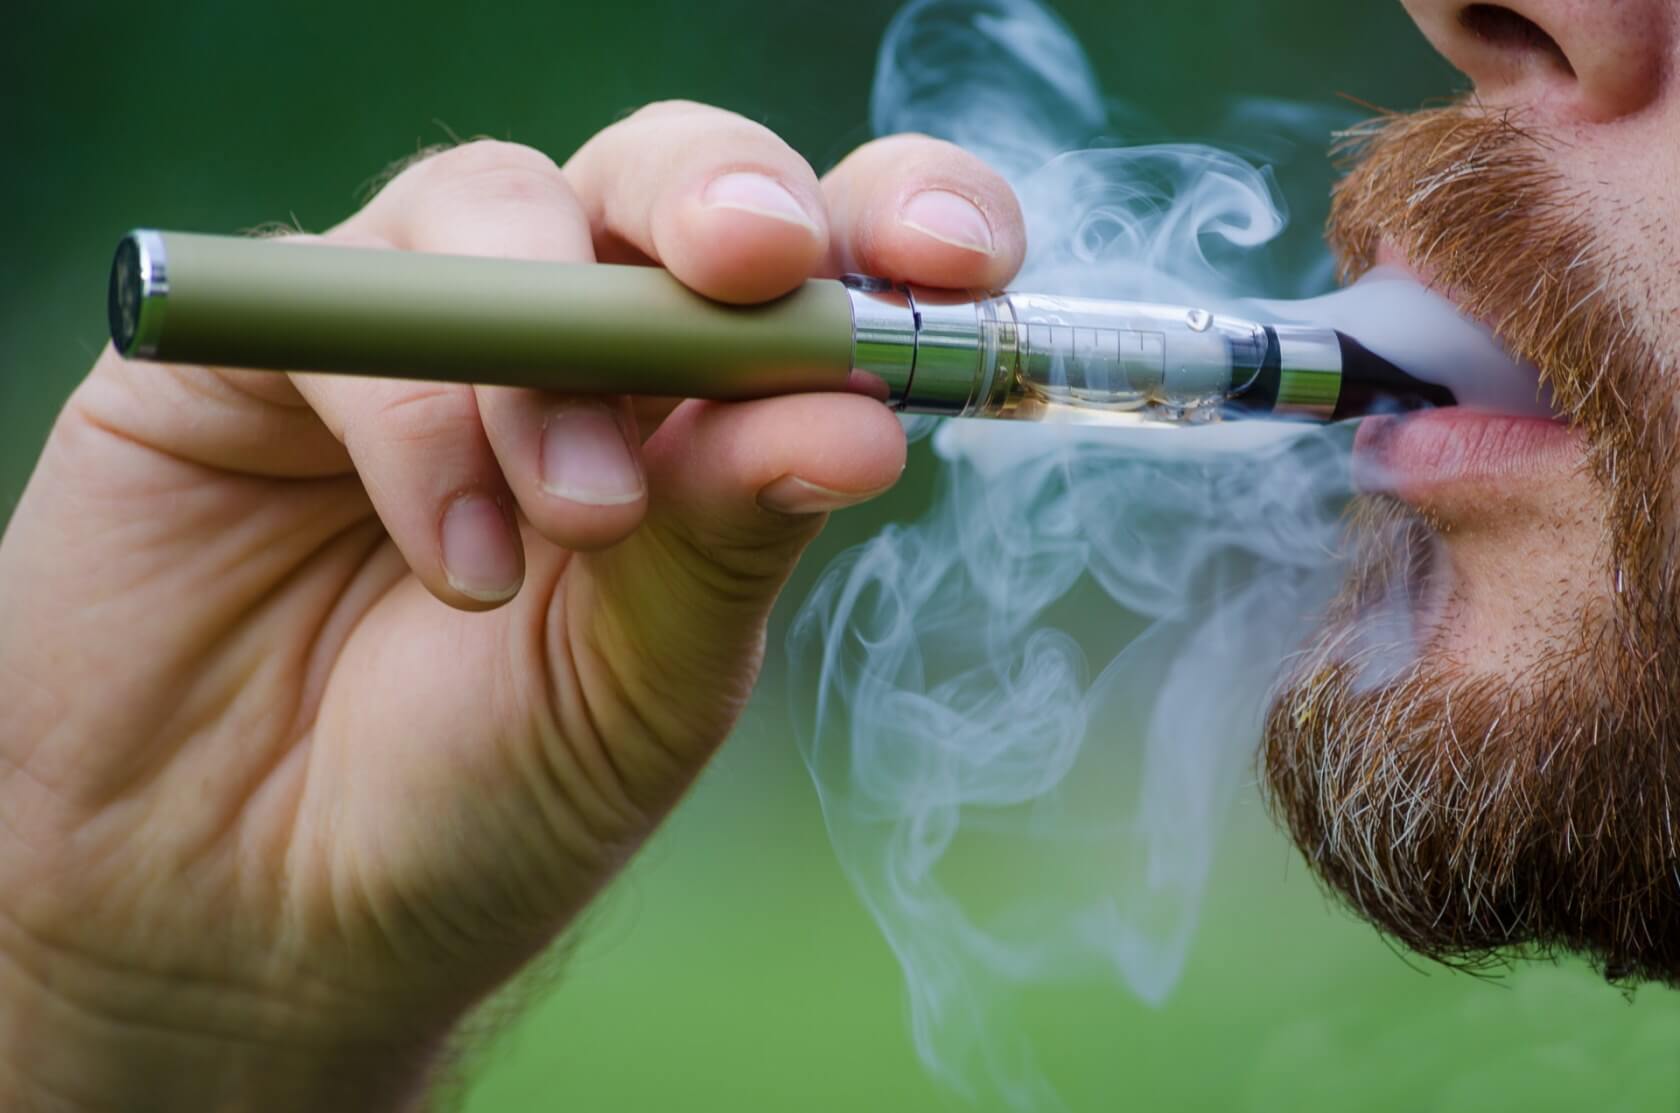 San Francisco is set to restrict e-cigarette sales in 2020, devices will require FDA approval